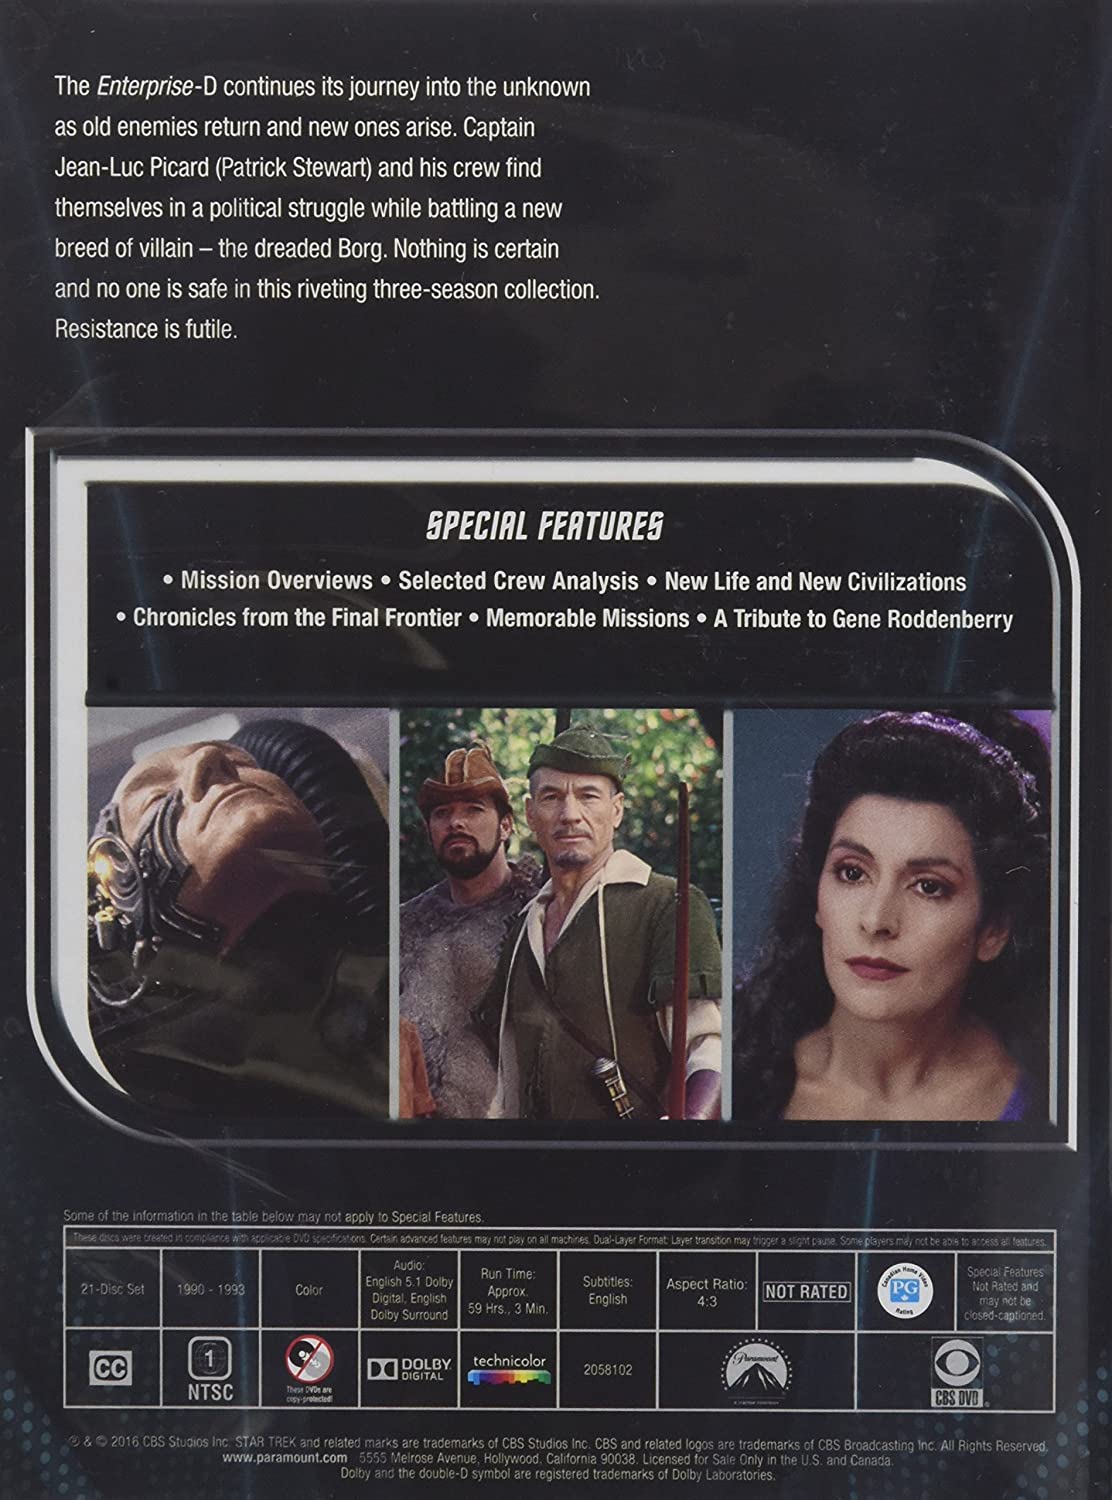 Star Trek The Next Generation: The Complete Series (DVD) - image 4 of 8